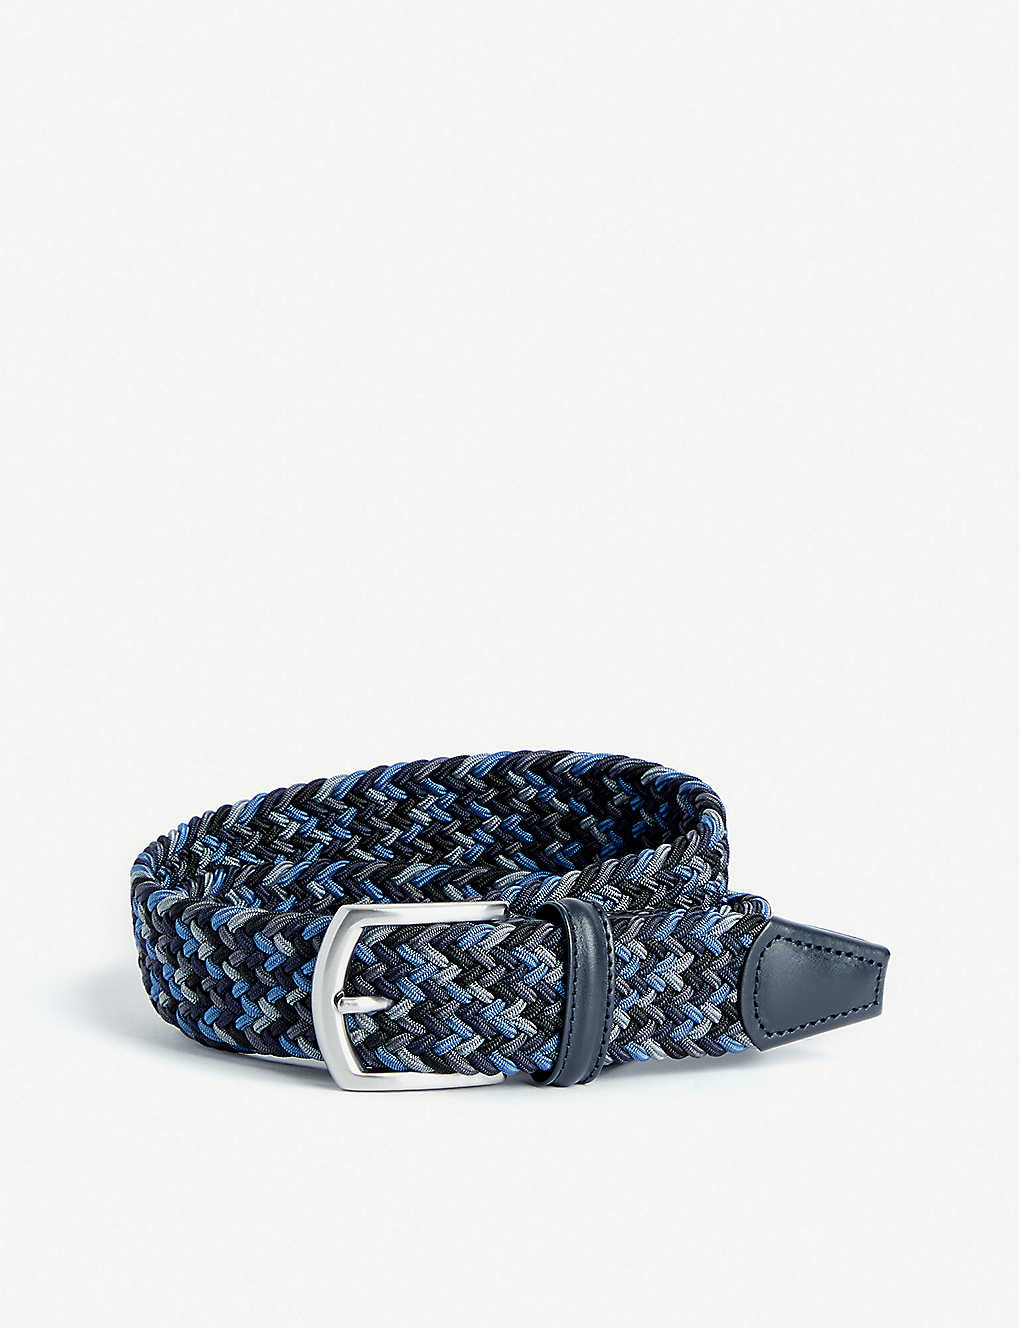 Anderson's Multi Woven Elasticated Belt In Navy, Grey And Silver